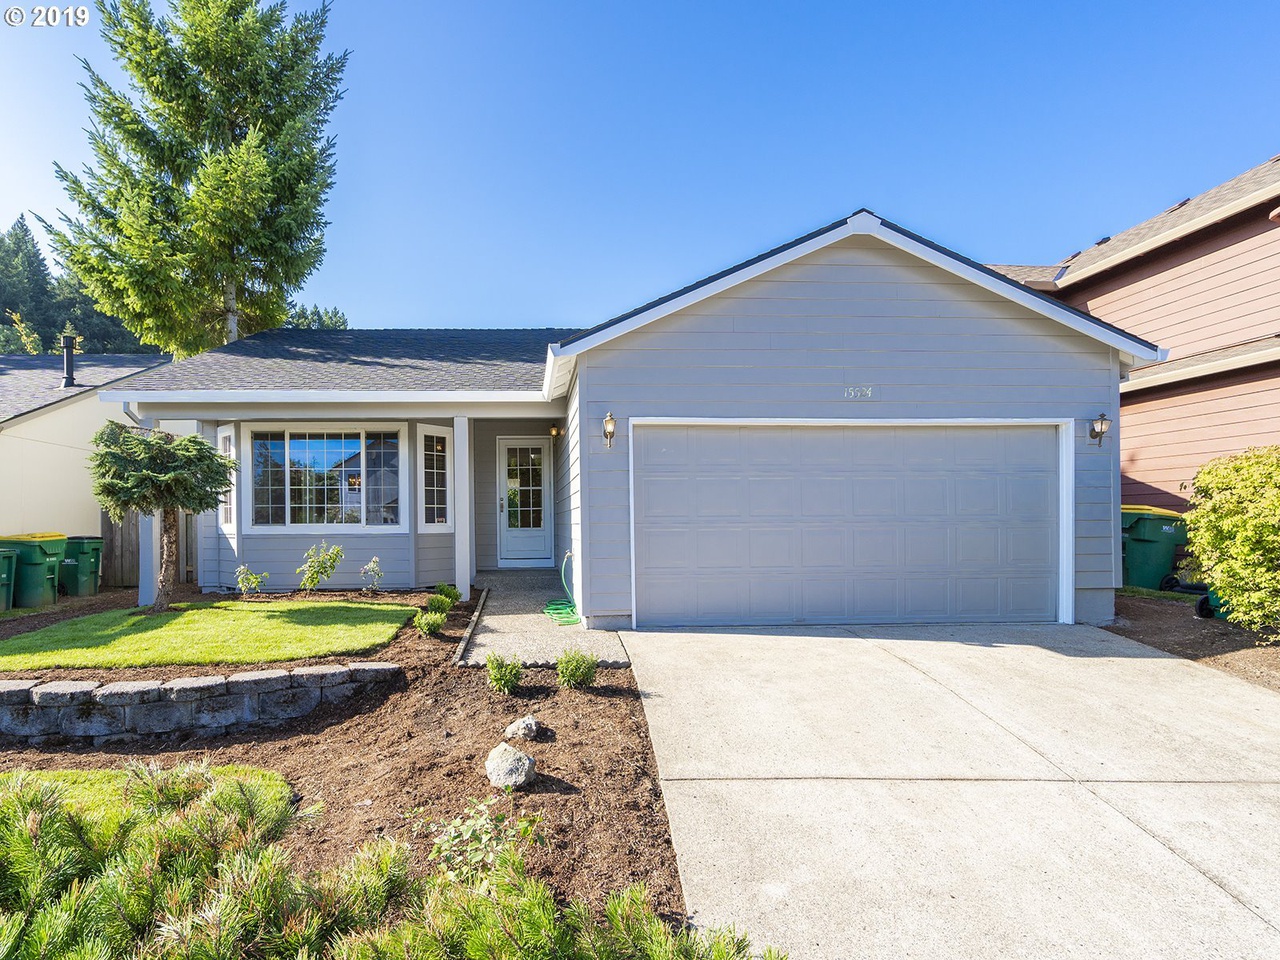 15524 SW Wintergreen St, Tigard, OR 97223 | MLS# 19559241 | Redfin